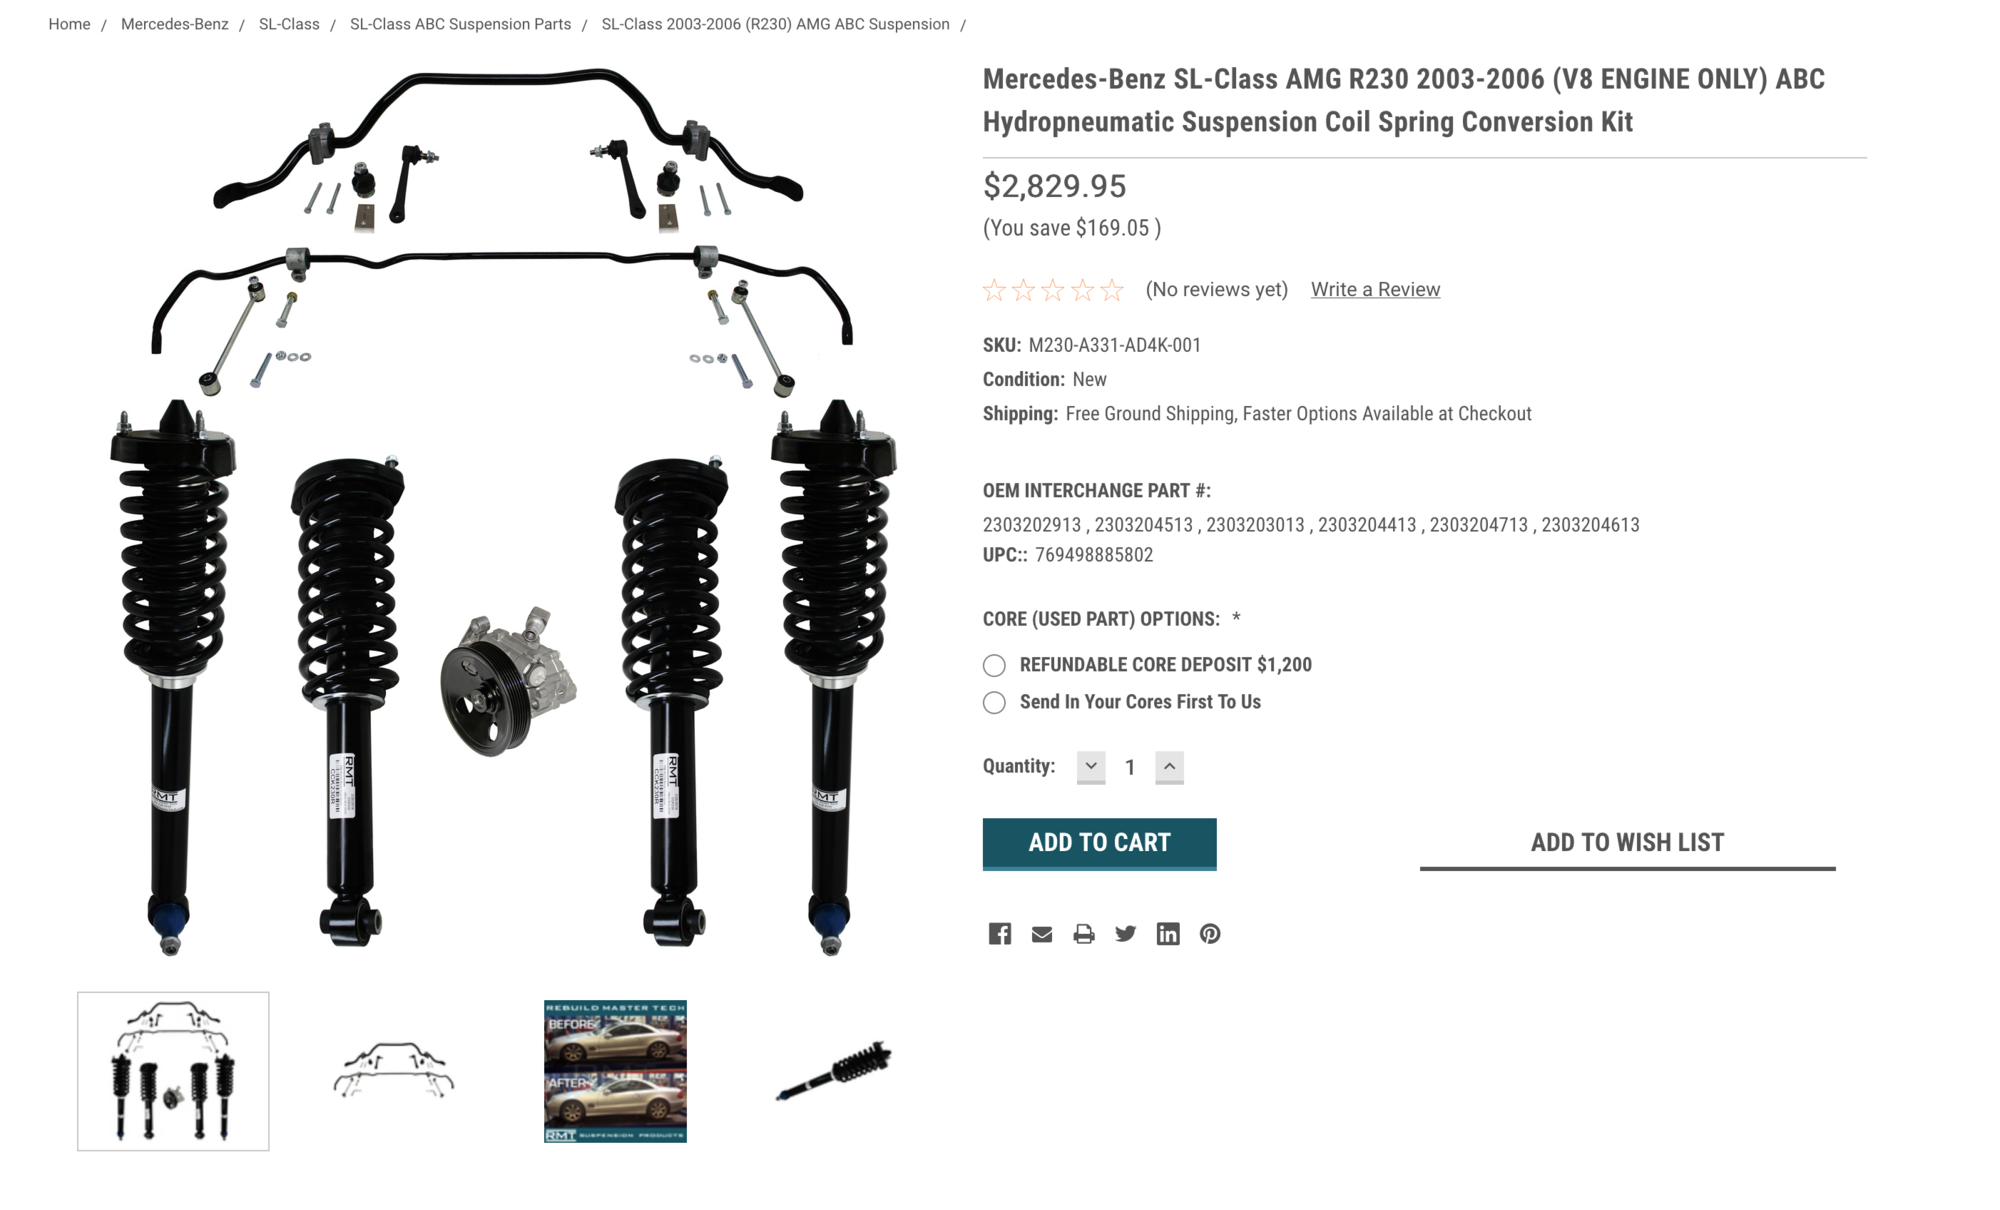 Steering/Suspension - Rebuild Master Tech (RMT) Coilover Kit for R230 cars -- replace your ABC - New - 2003 to 2006 Mercedes-Benz SL55 AMG - Grass Valley, CA 95949, United States